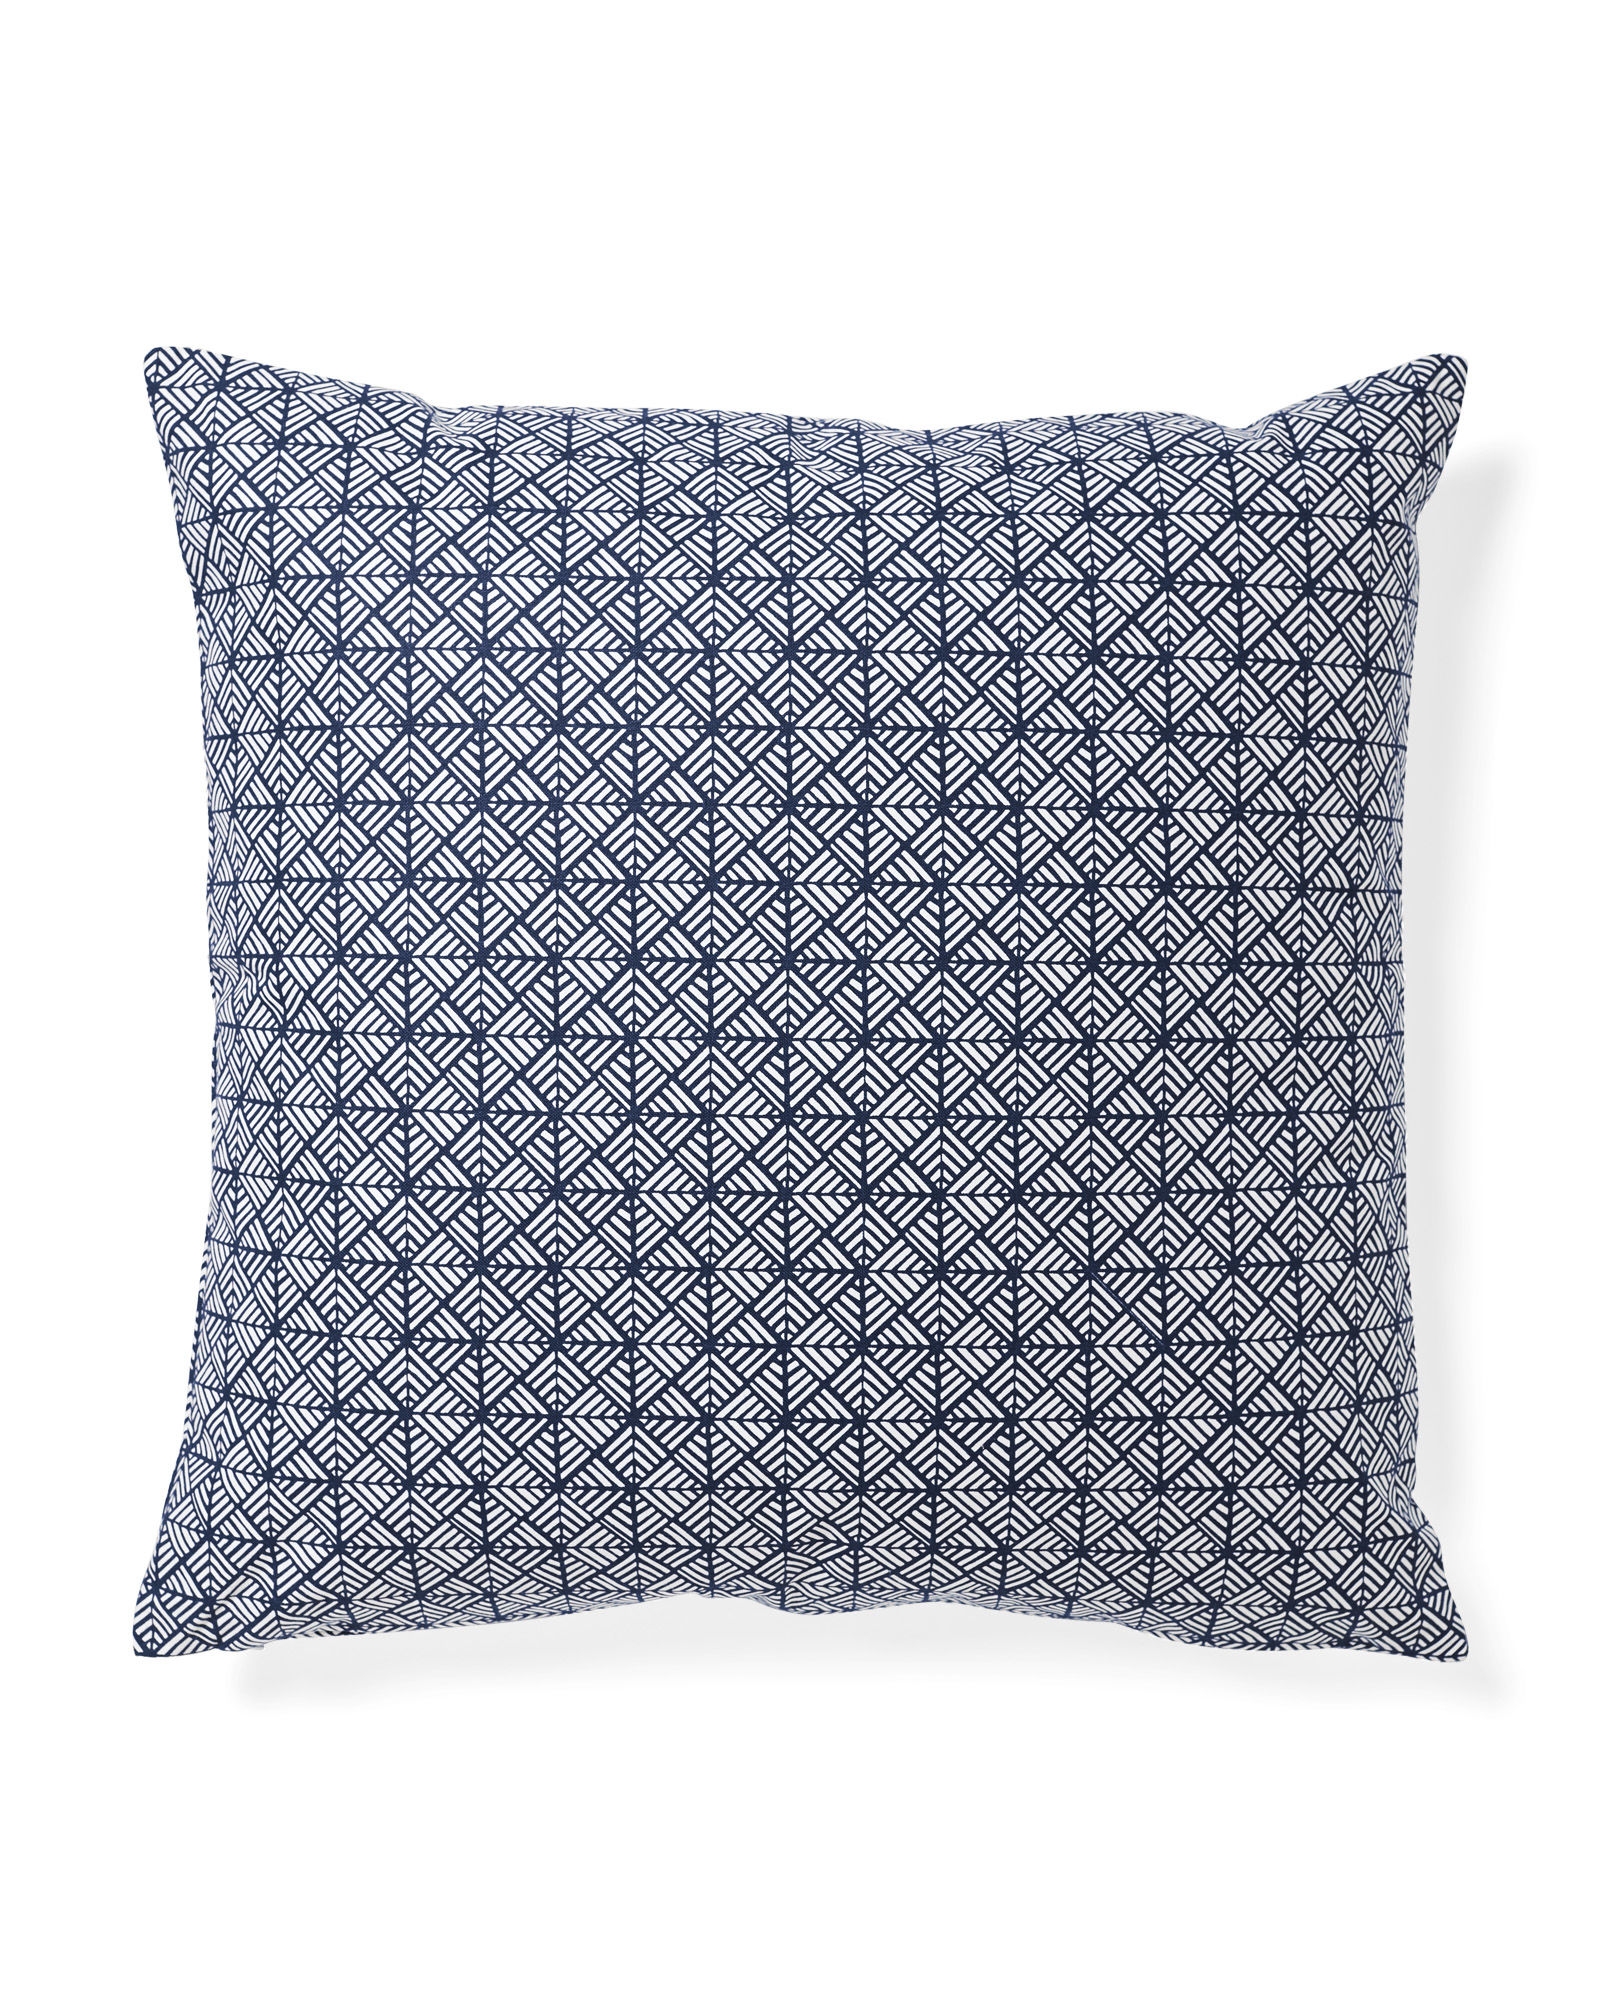 Origami Pillow Cover - Image 0